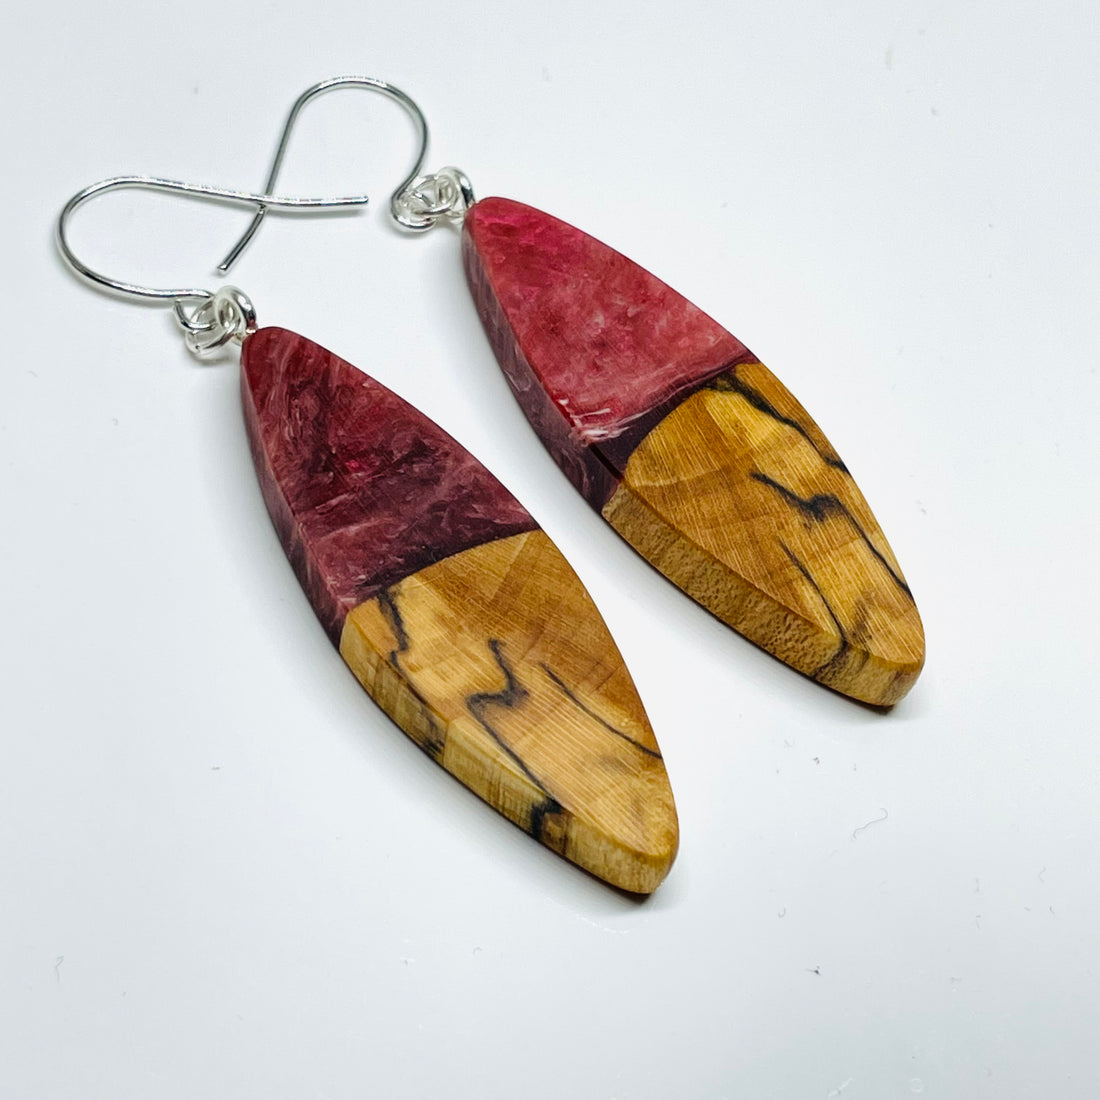 handmade jewelry, Minnesota local wood and resin artist. Deep red and white swirled resin with spalted maple wood, nickel free dangle earrings sliver shaped